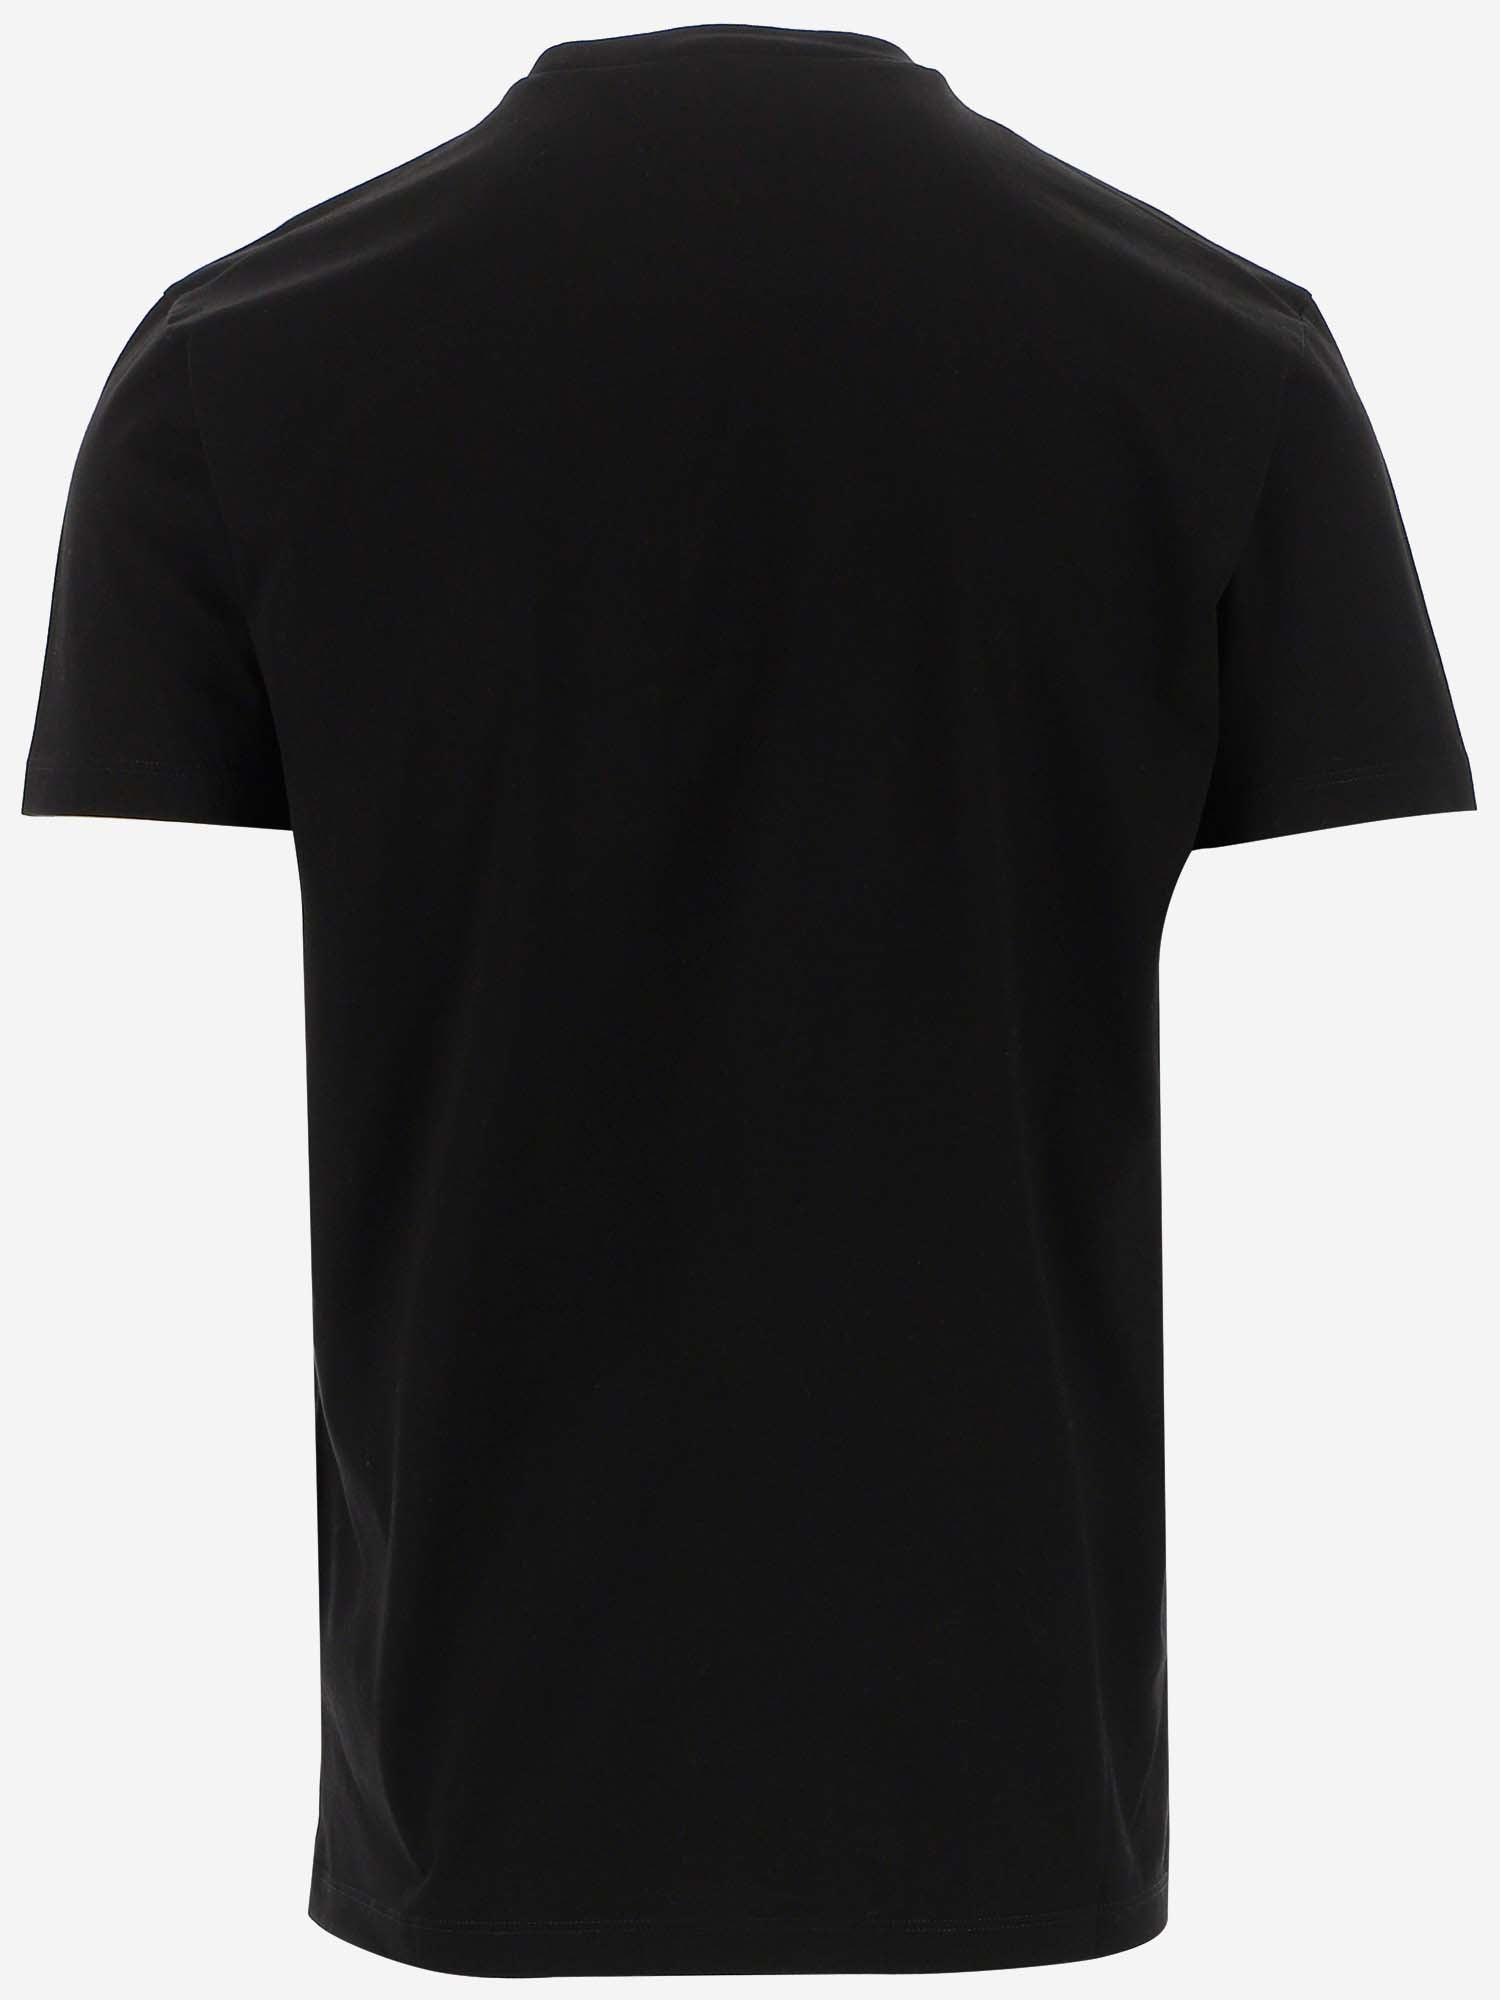 DSquared² Printed Cotton Jersey T-shirt in Black for Men | Lyst